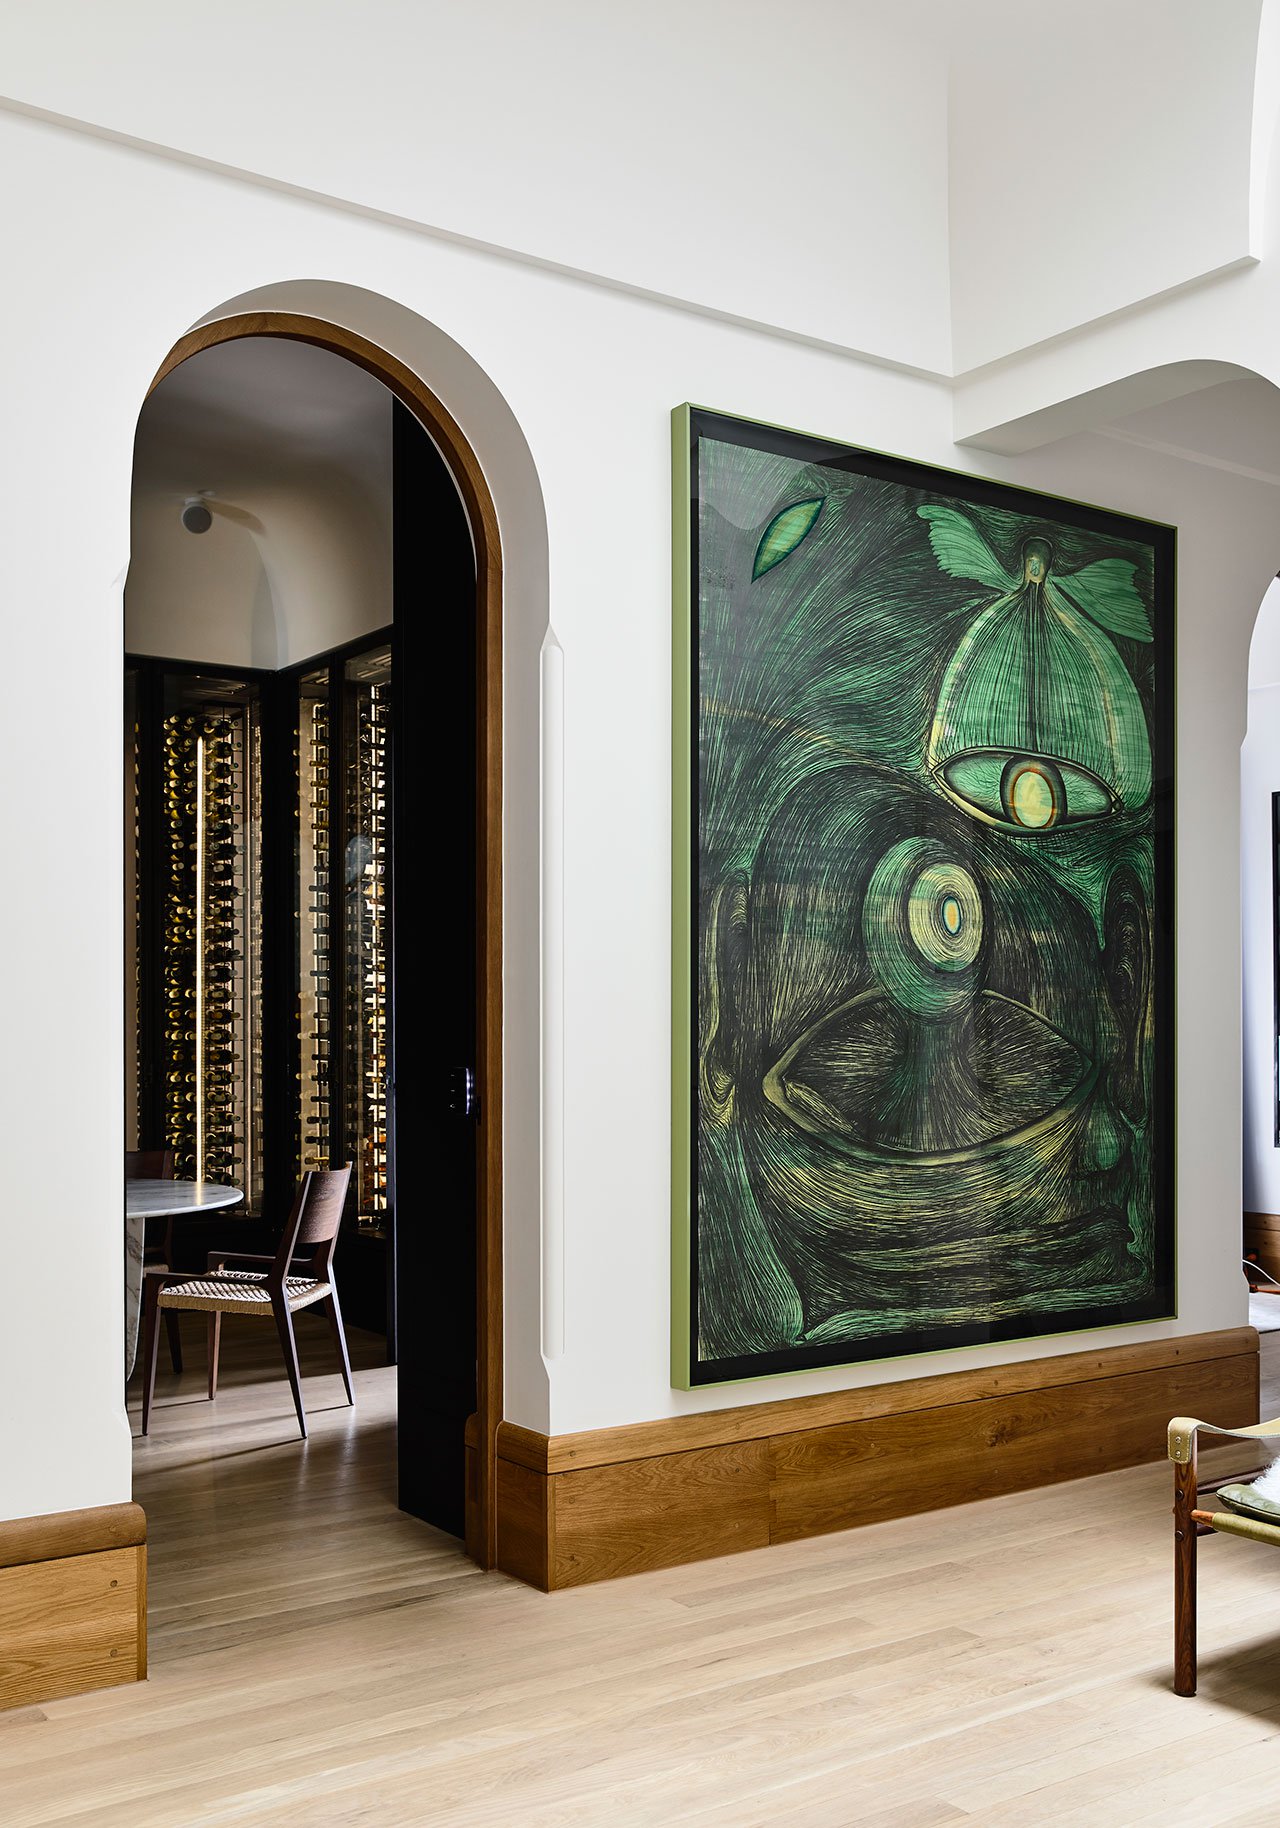 Stunning artworks from the owner's collection add to the space